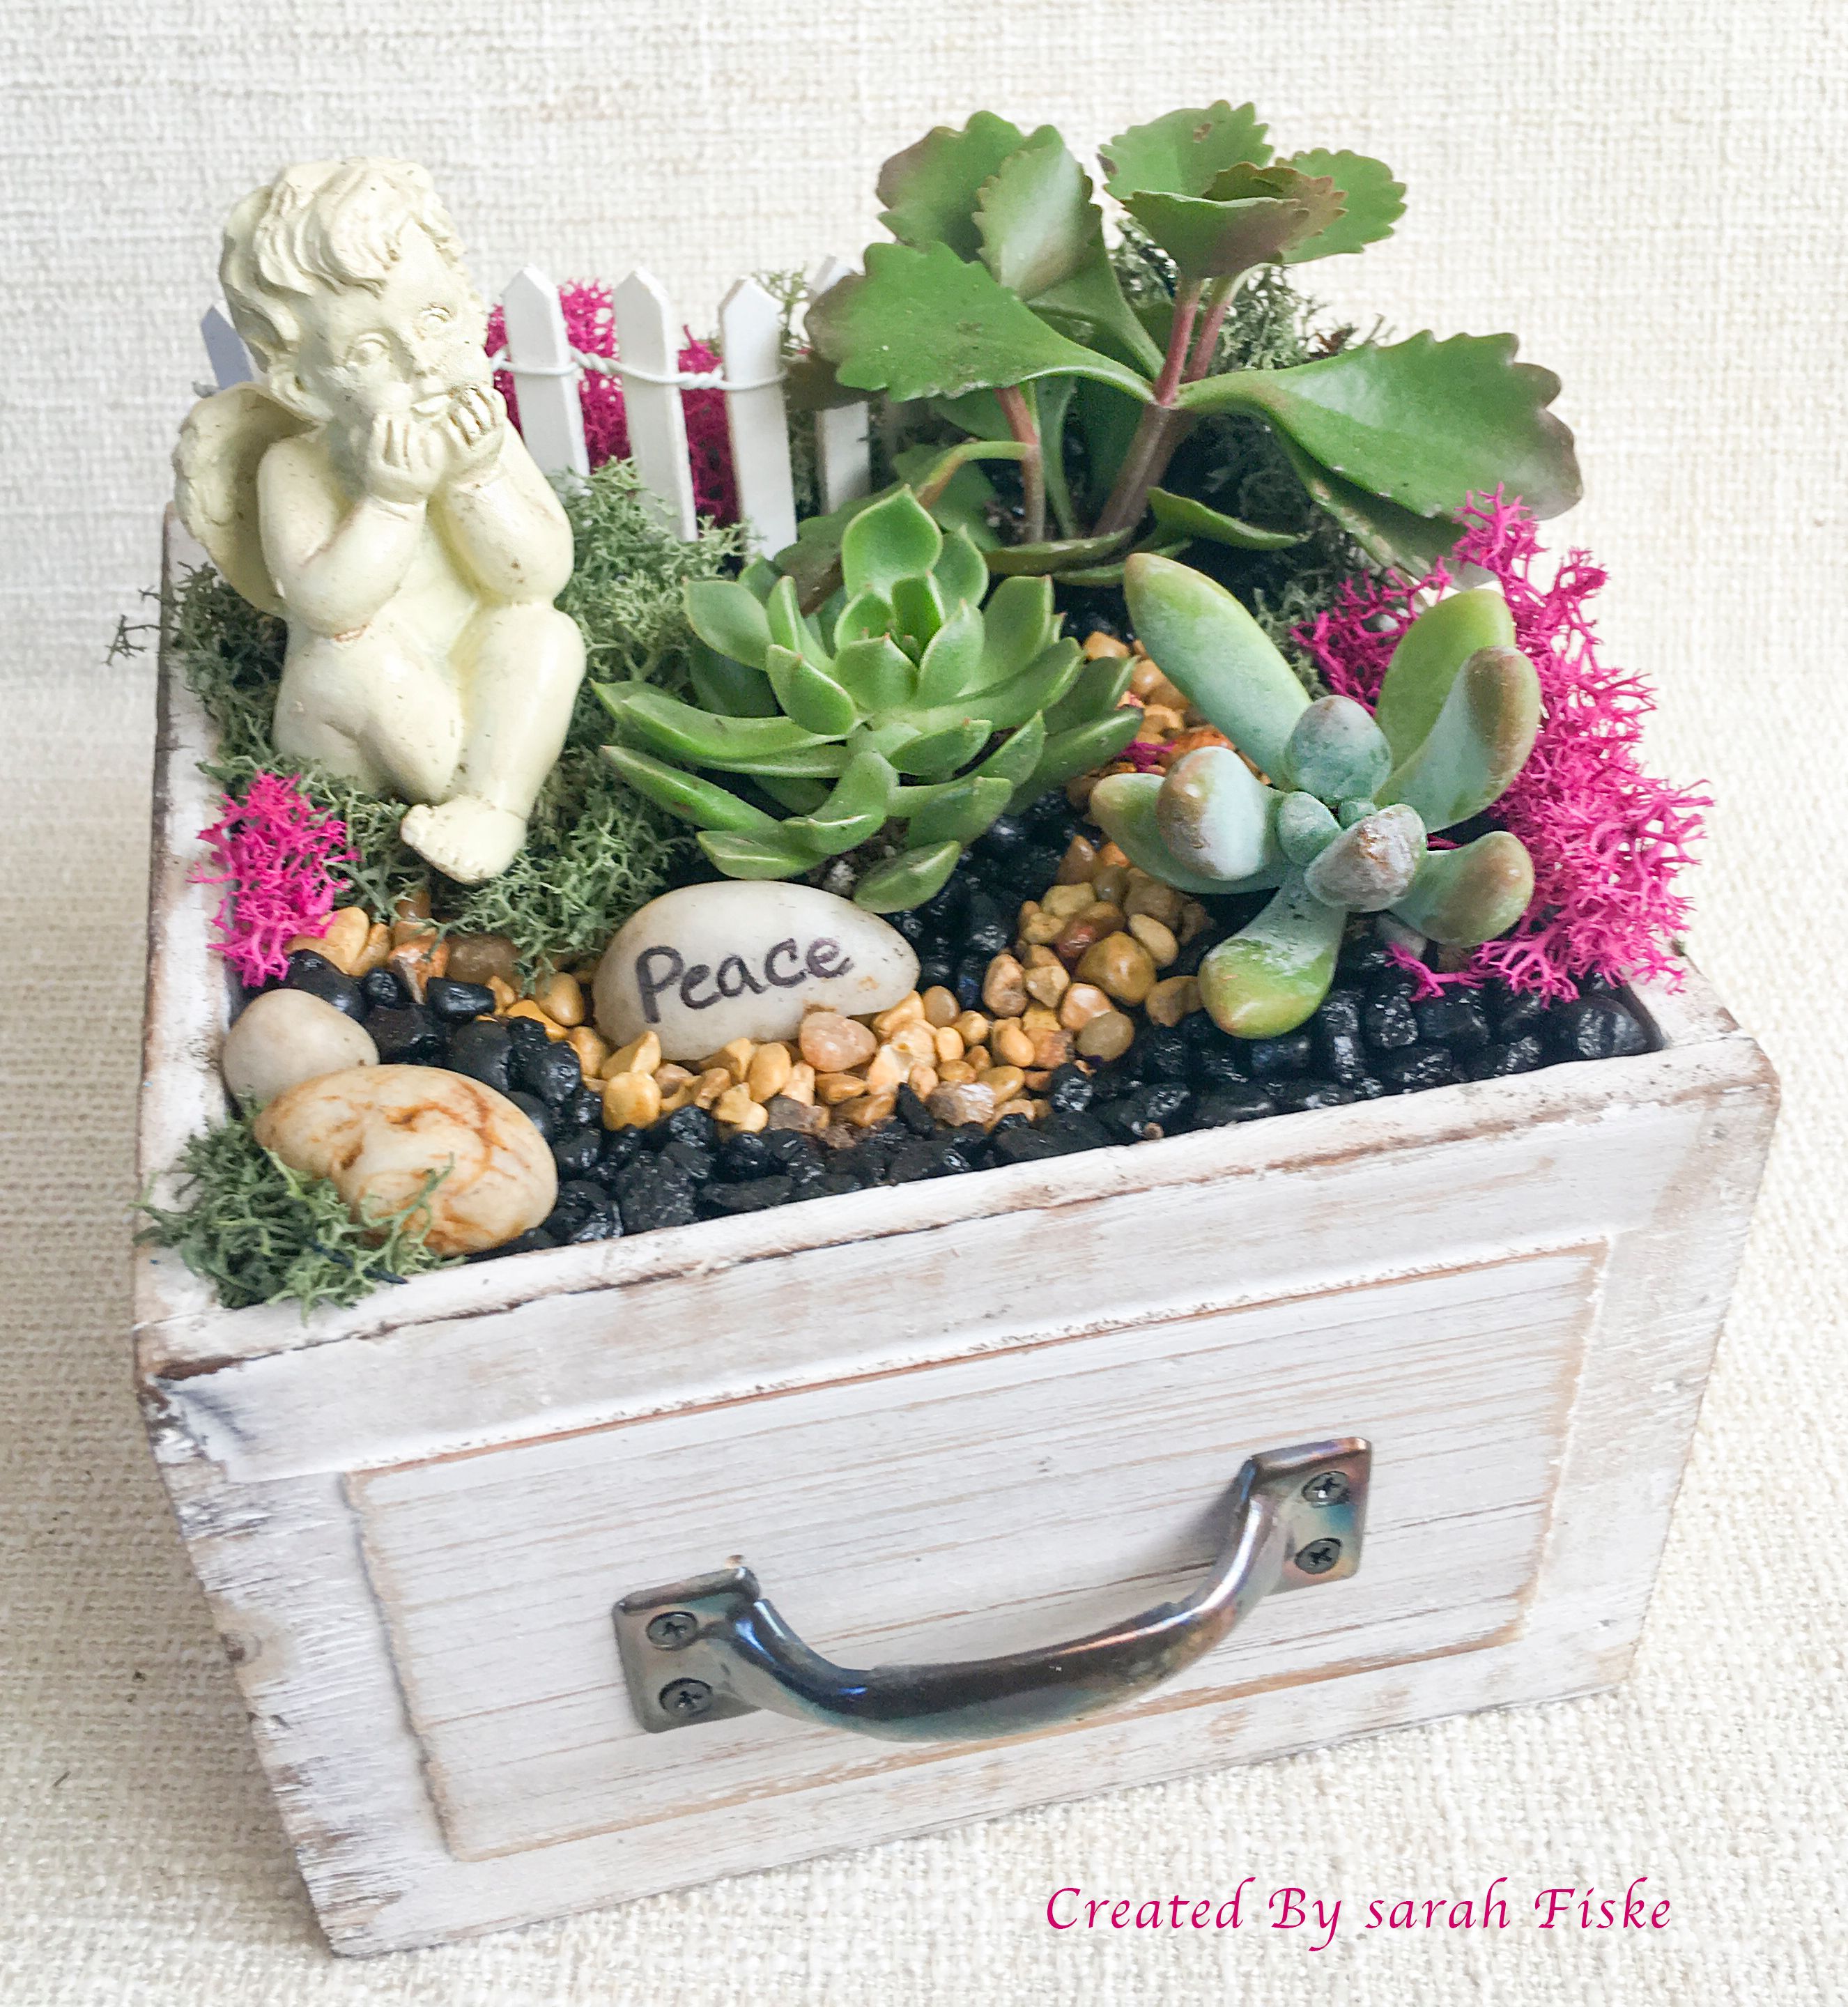 A Peaceful Angel in Wooden Drawer plant nite project by Yaymaker